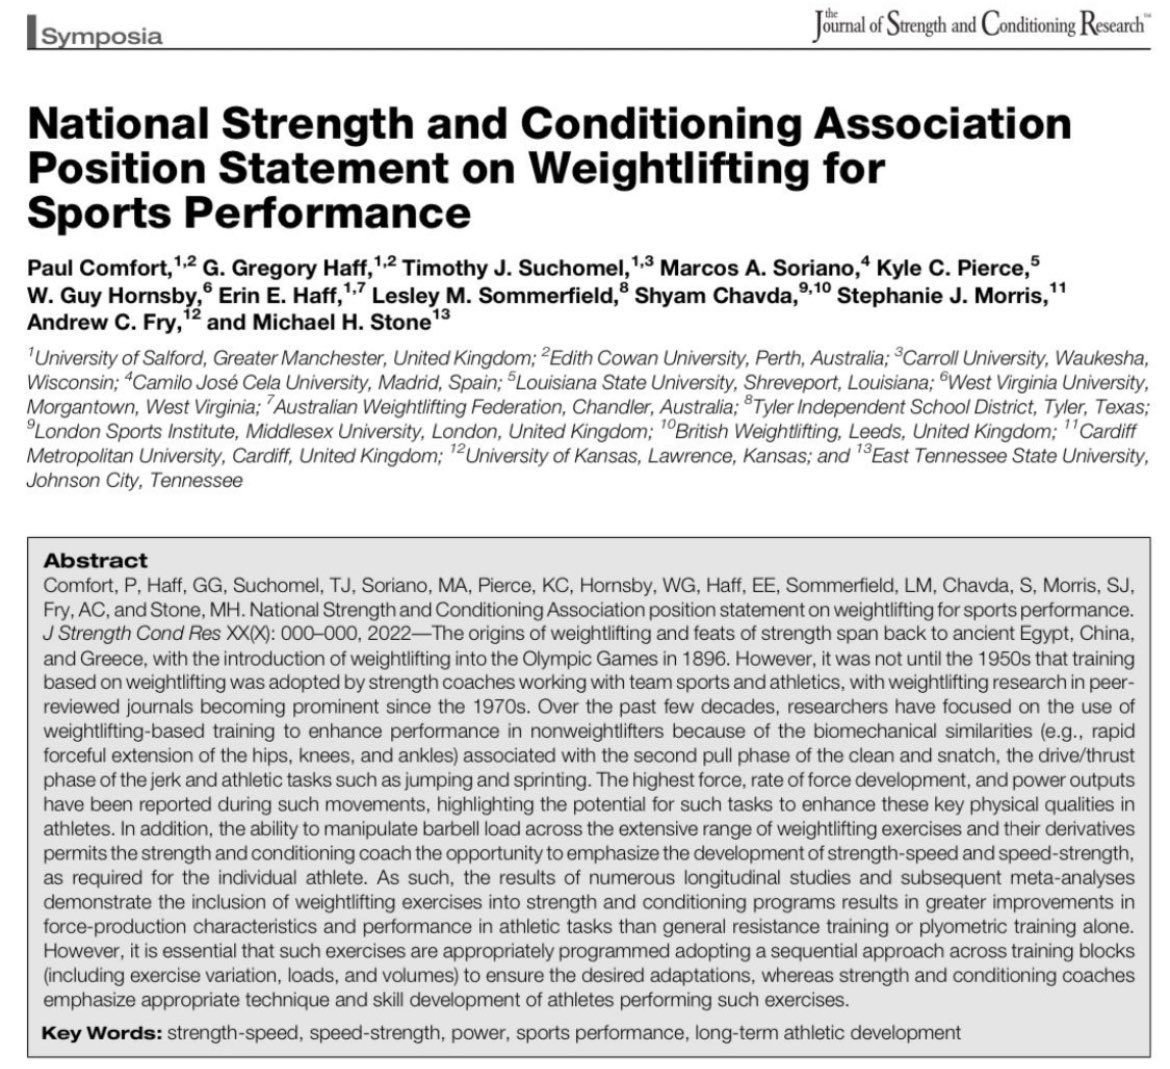 Great to see @stephmorris979 from the YPD Centre contributing to the @NSCA position statement on weightlifting for sports performance. This will be a highly influential paper for many coaches. @CardiffMetCSSHS @CSS_Research